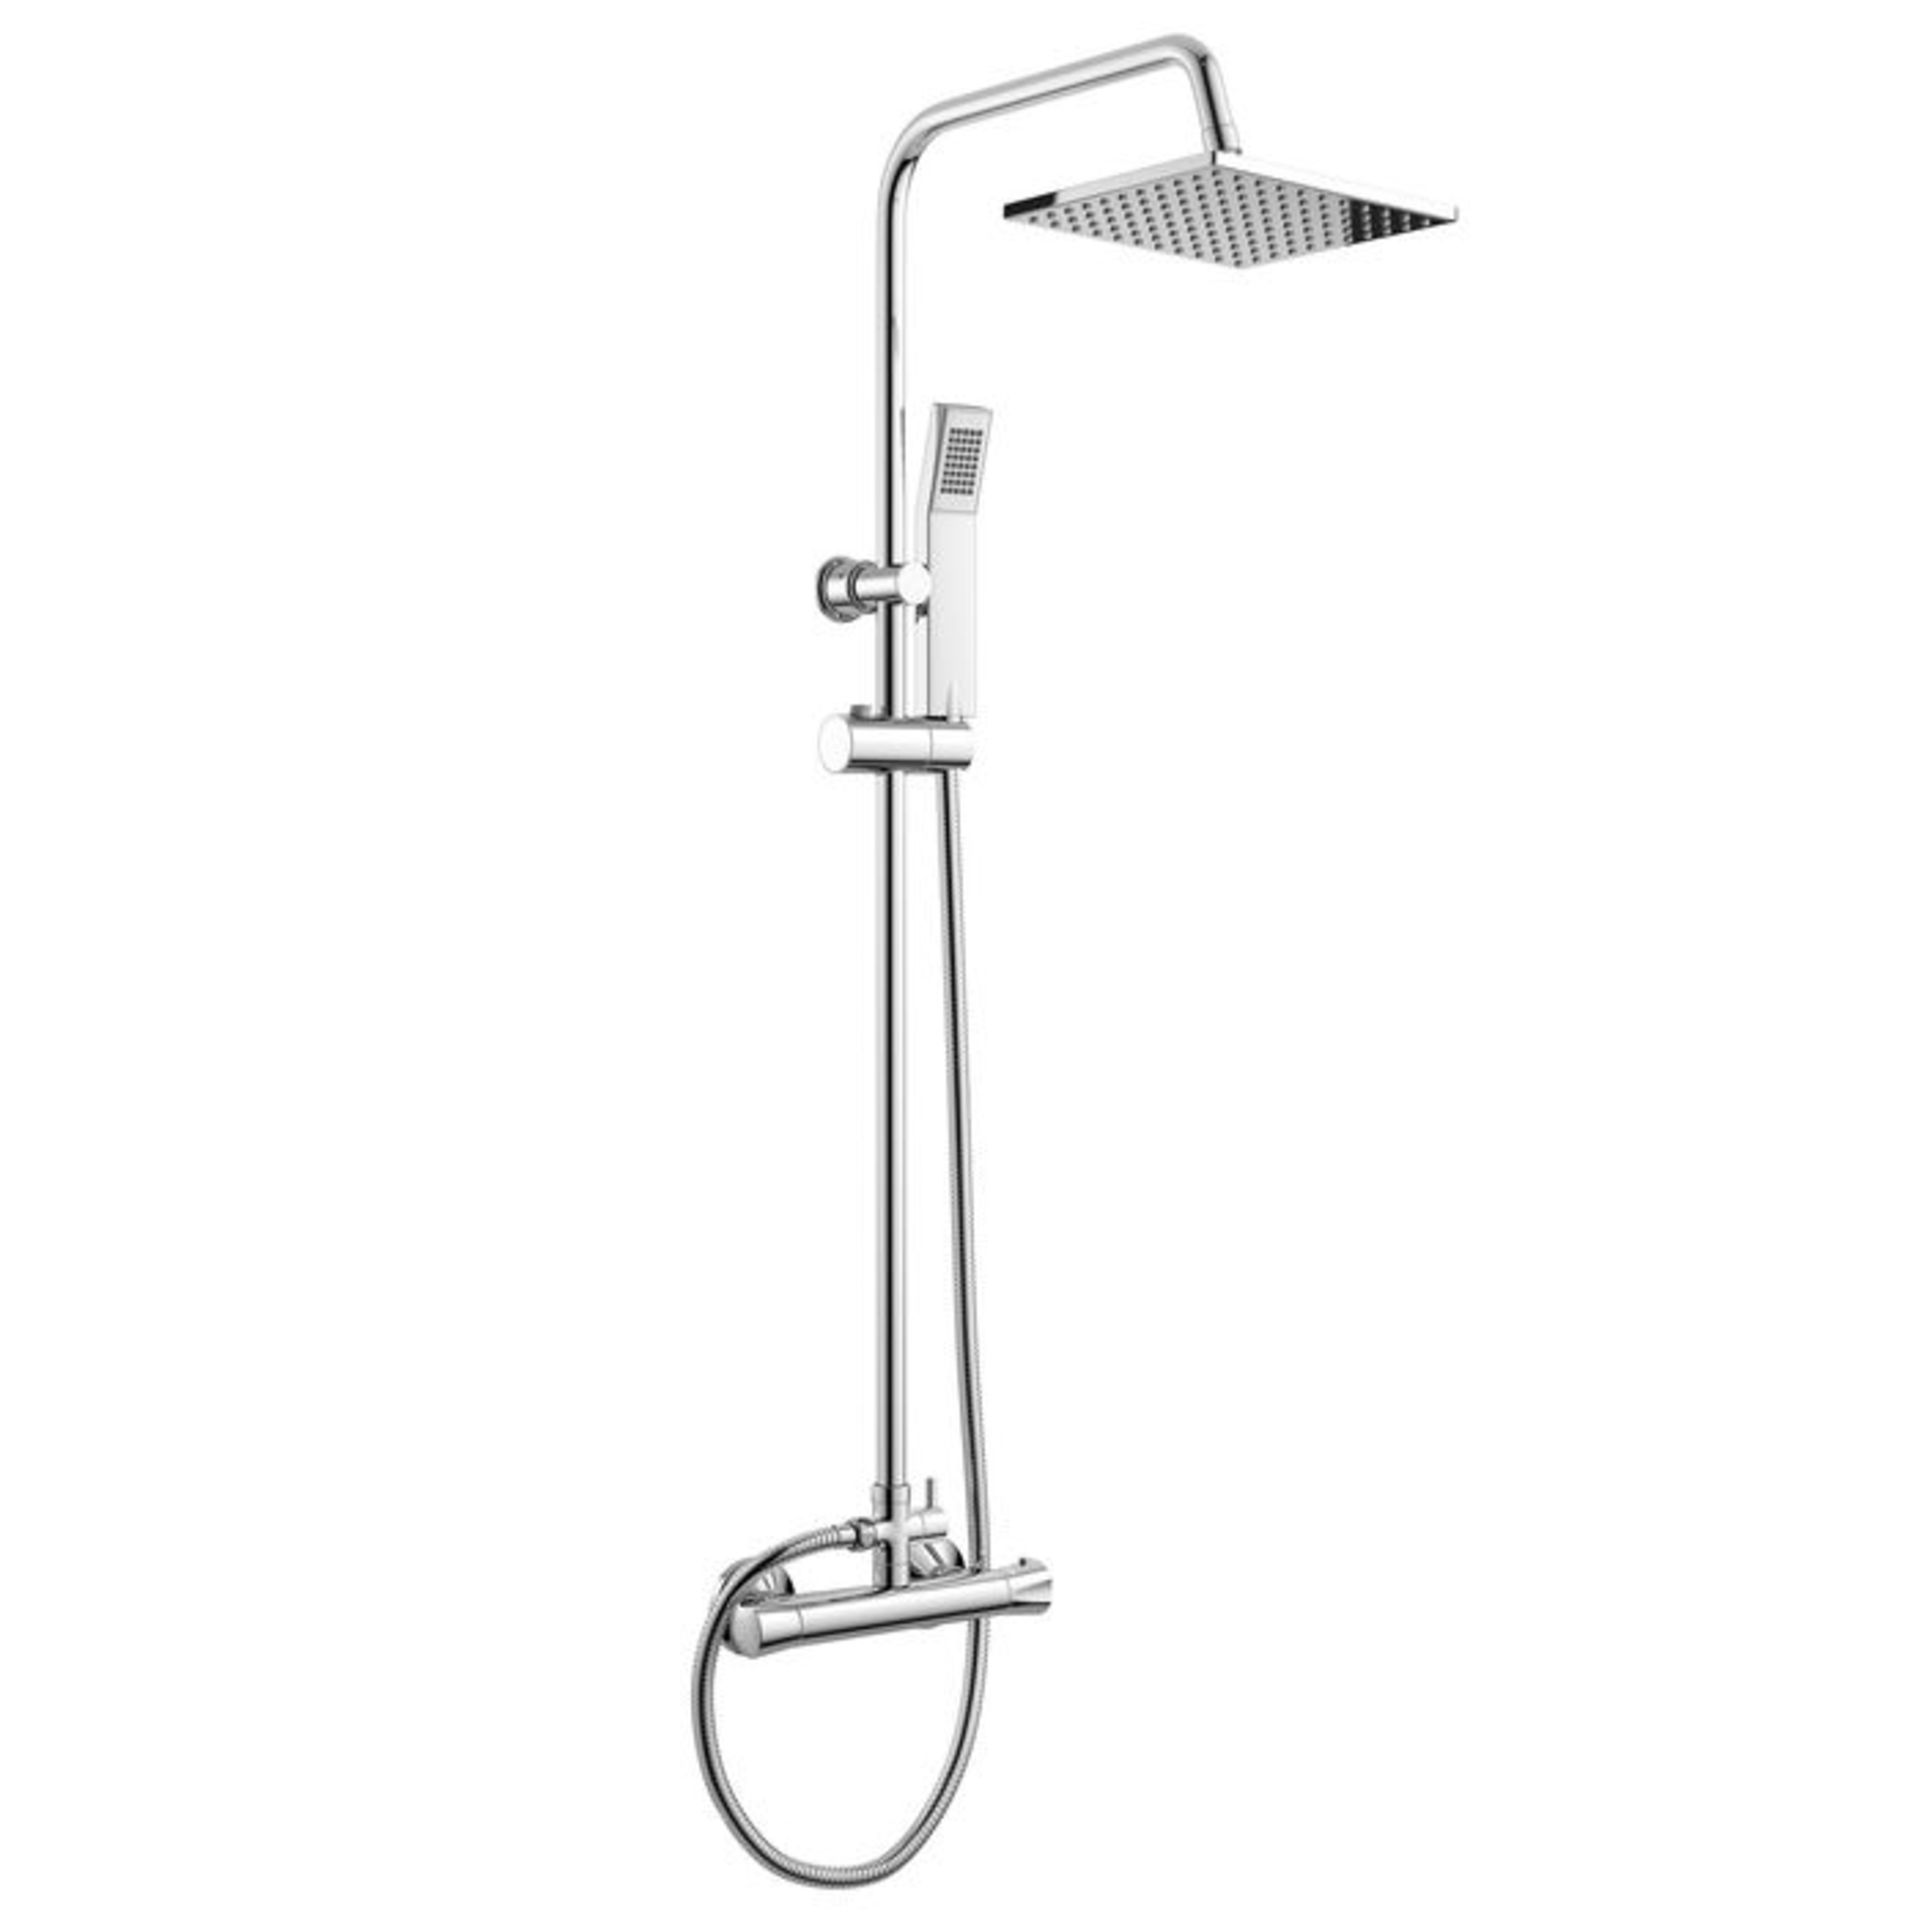 (DA84) Square Exposed Thermostatic Shower Kit & Head. Curved features and contemporary rounded